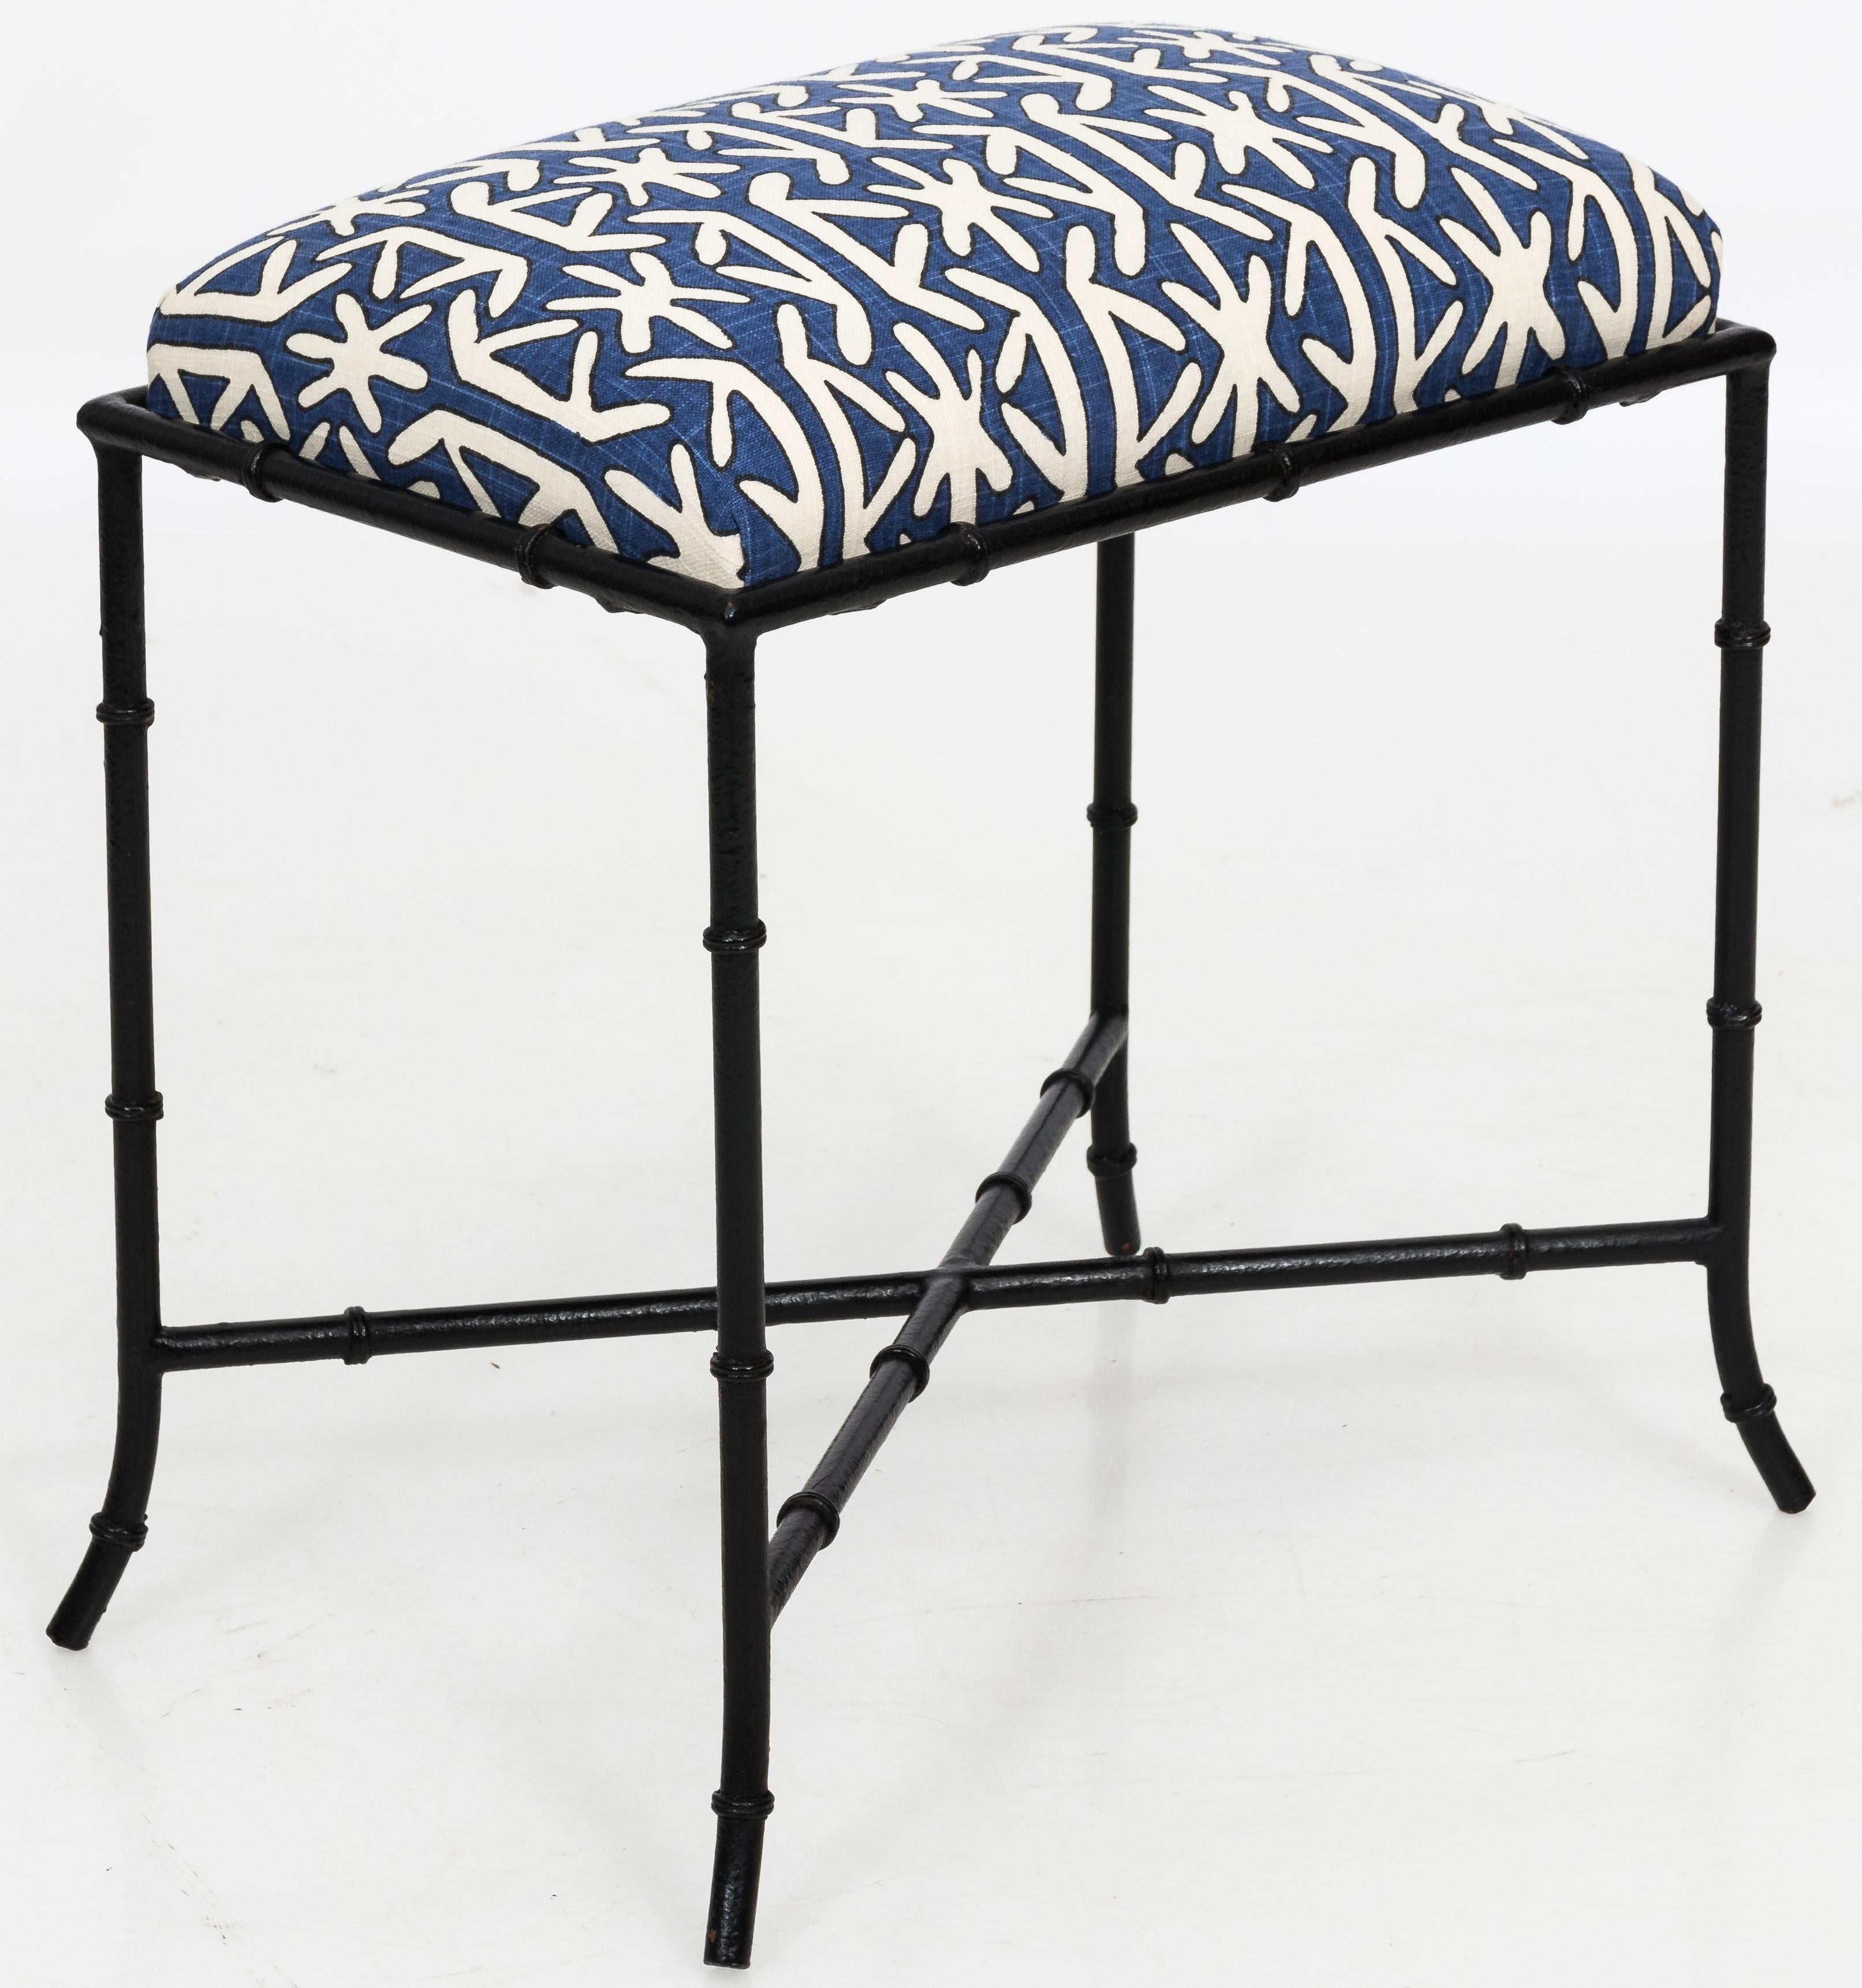 Midcentury black gloss metal faux bamboo style bench. Newly upholstered in Thibaut 'Rinca' dark blue-and-white linen fabric.